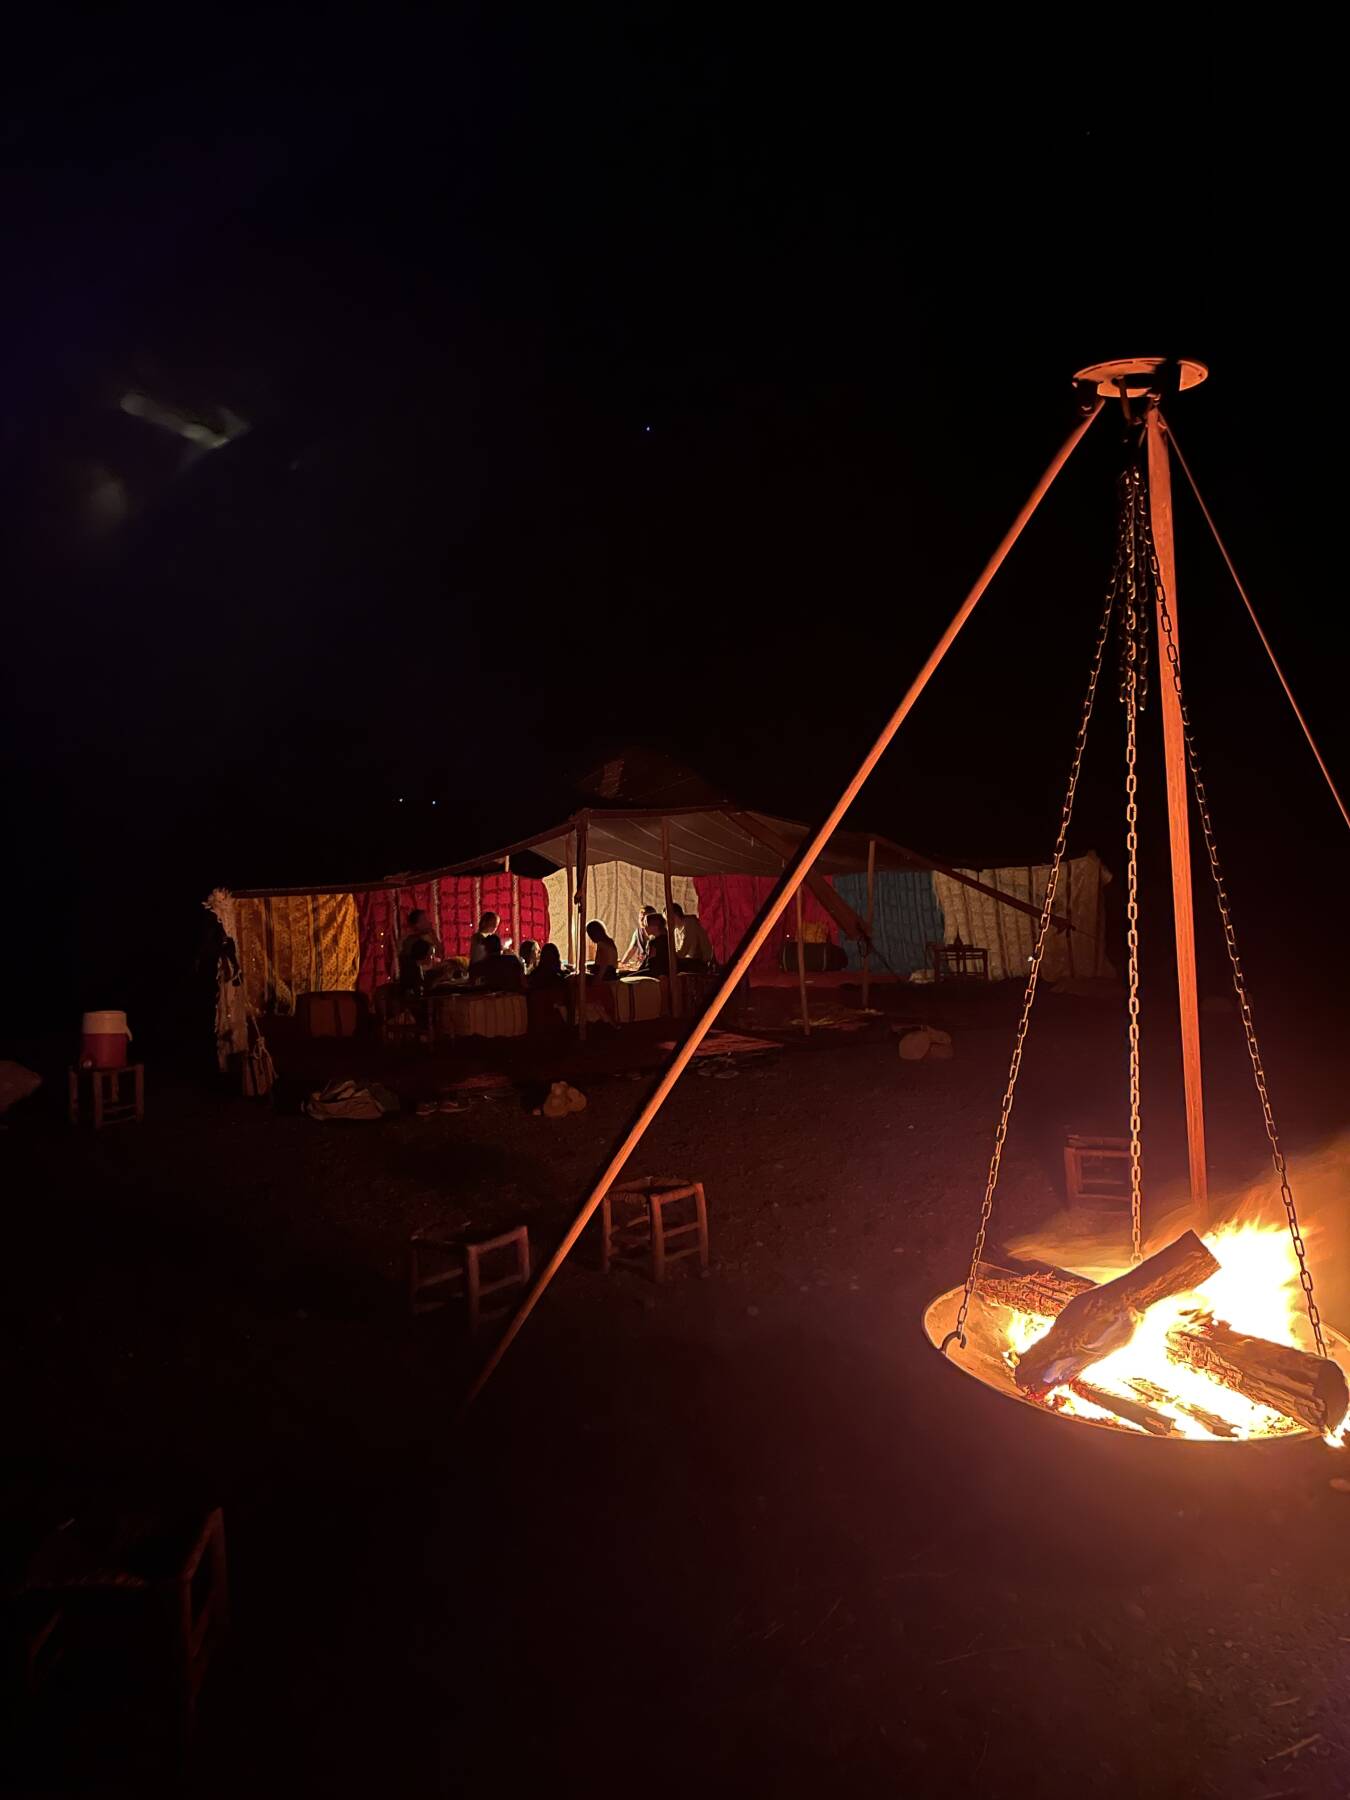 Quad weekend and night in a Berber camp + party